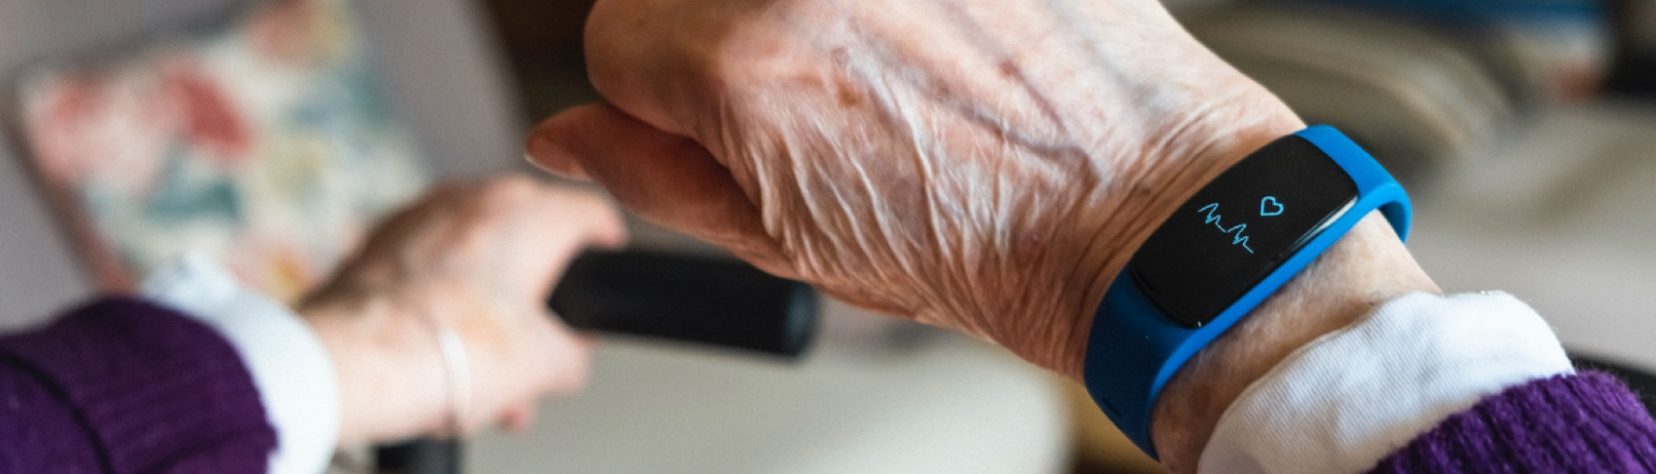 wearable device on older woman's wrist showing her heart rate